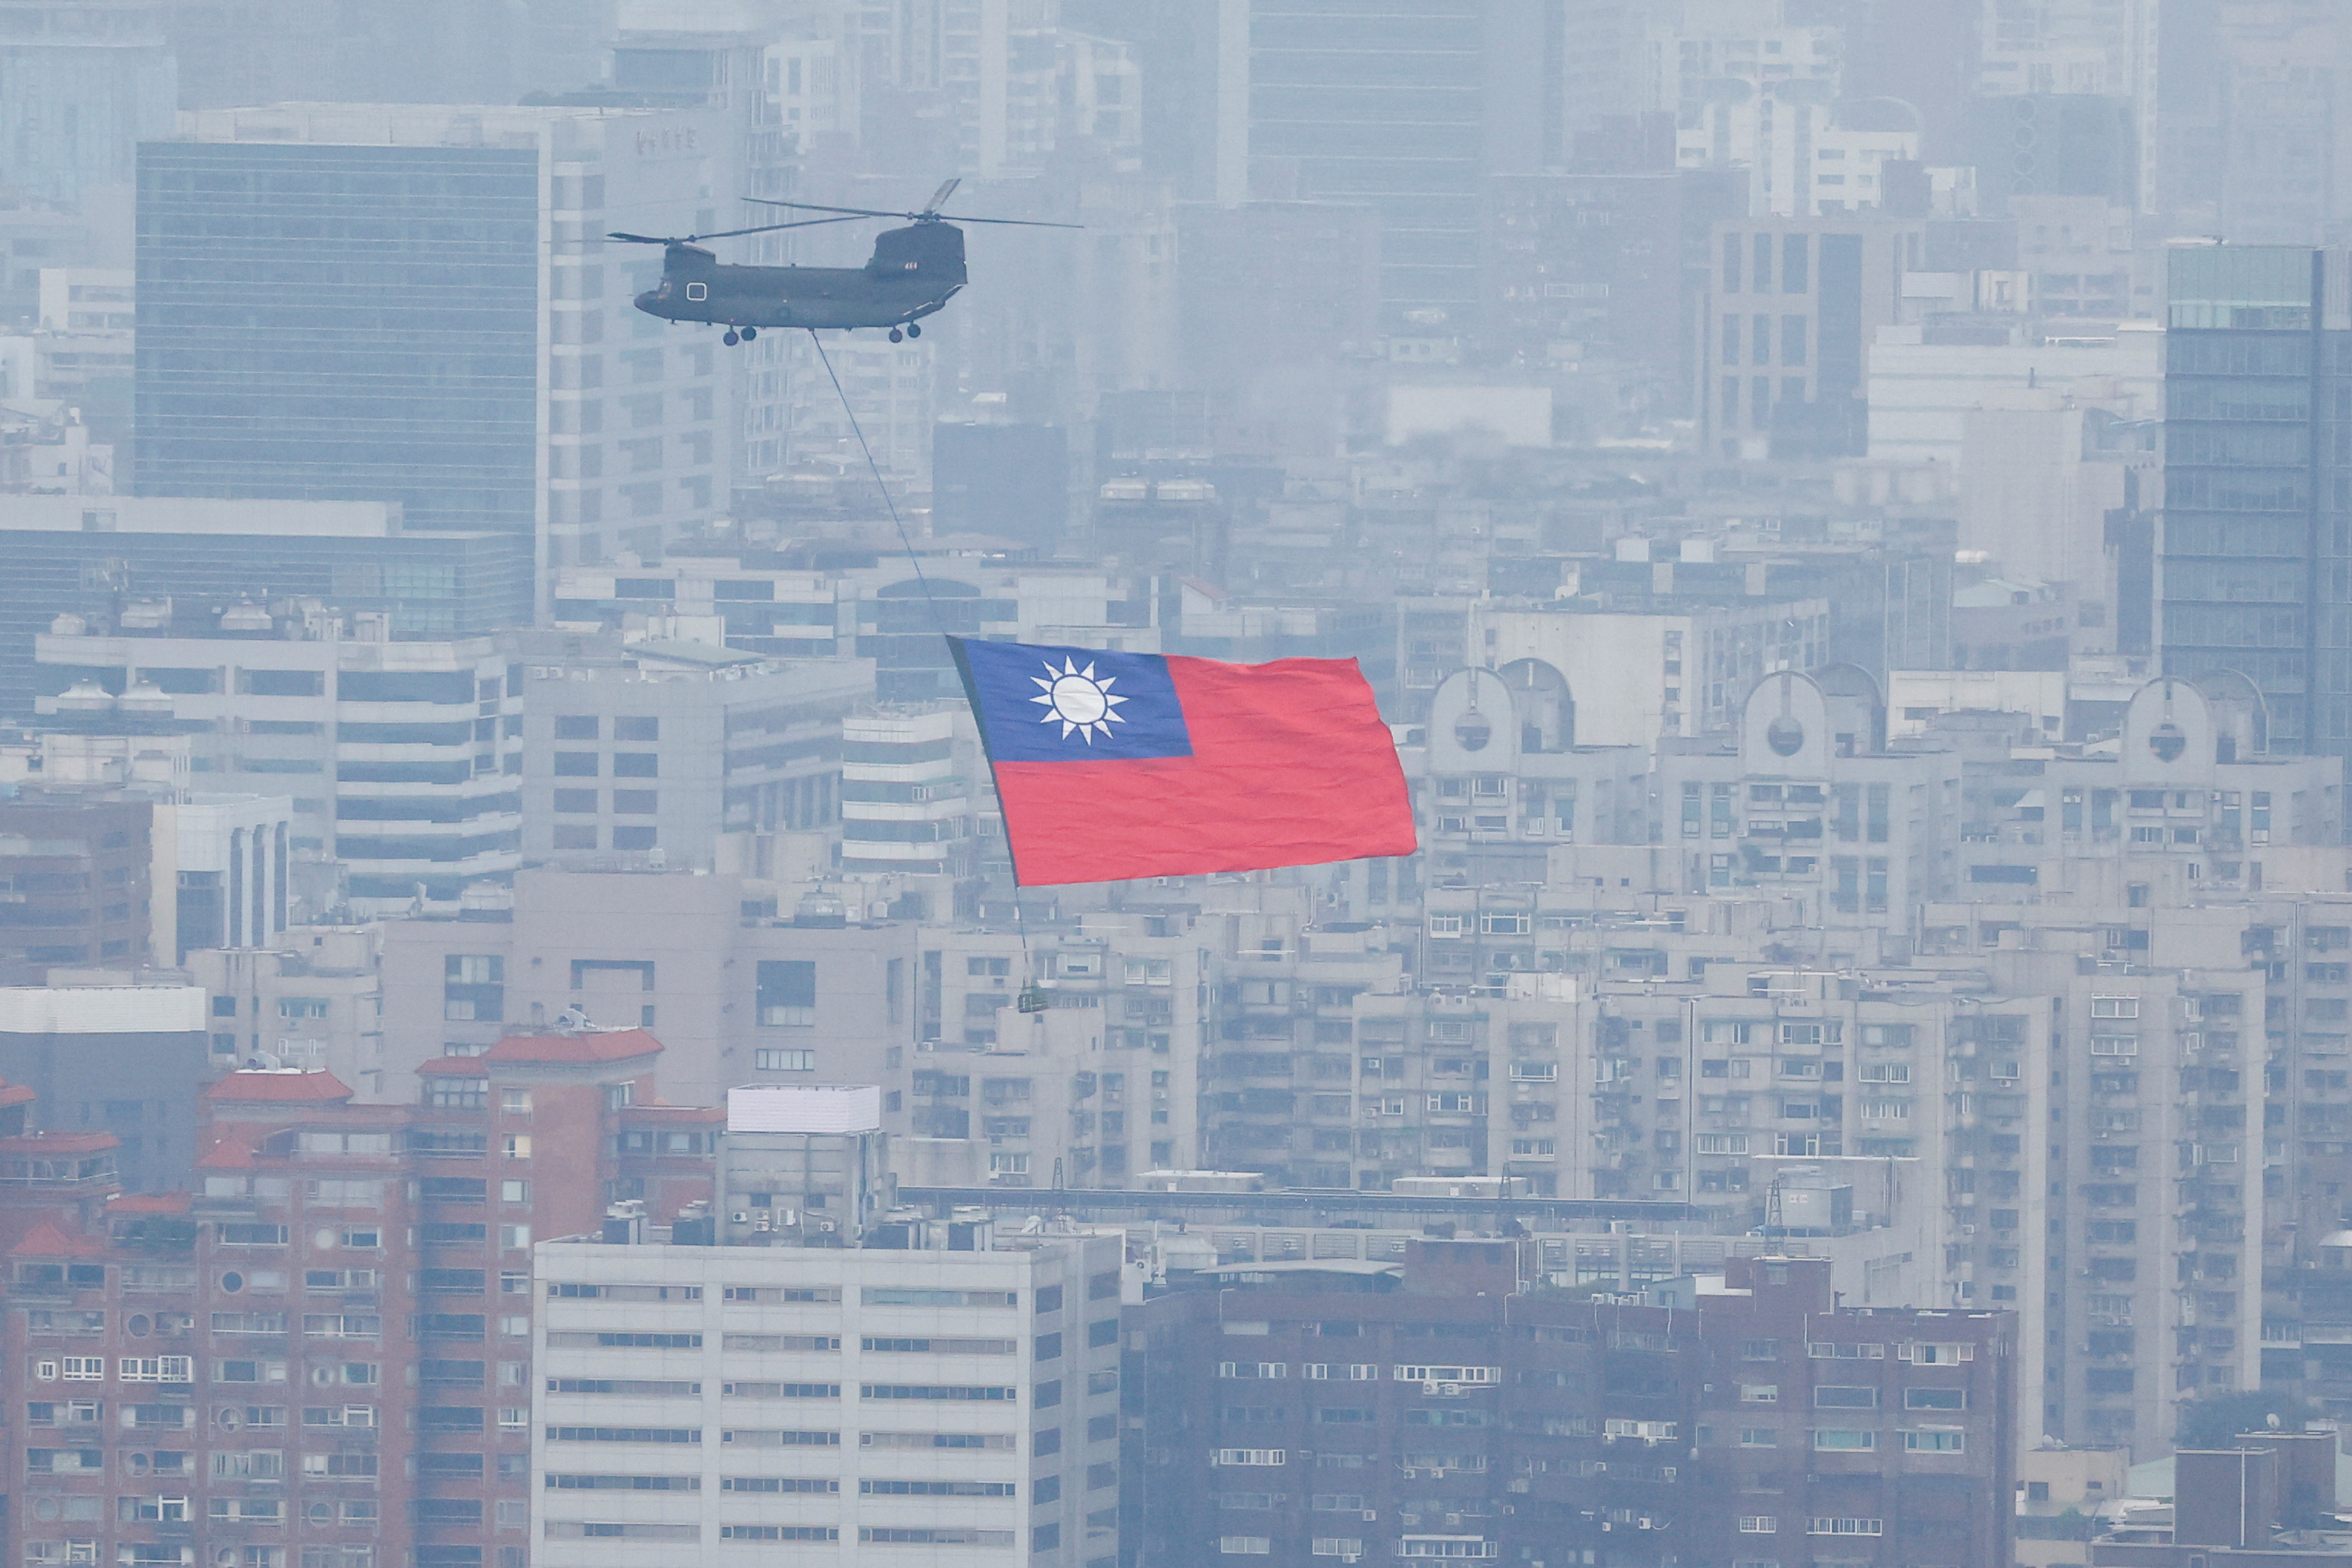 The Taiwanese flag over Taipei during the National Day celebration (REUTERS/Carlos Garcia Rawlins)